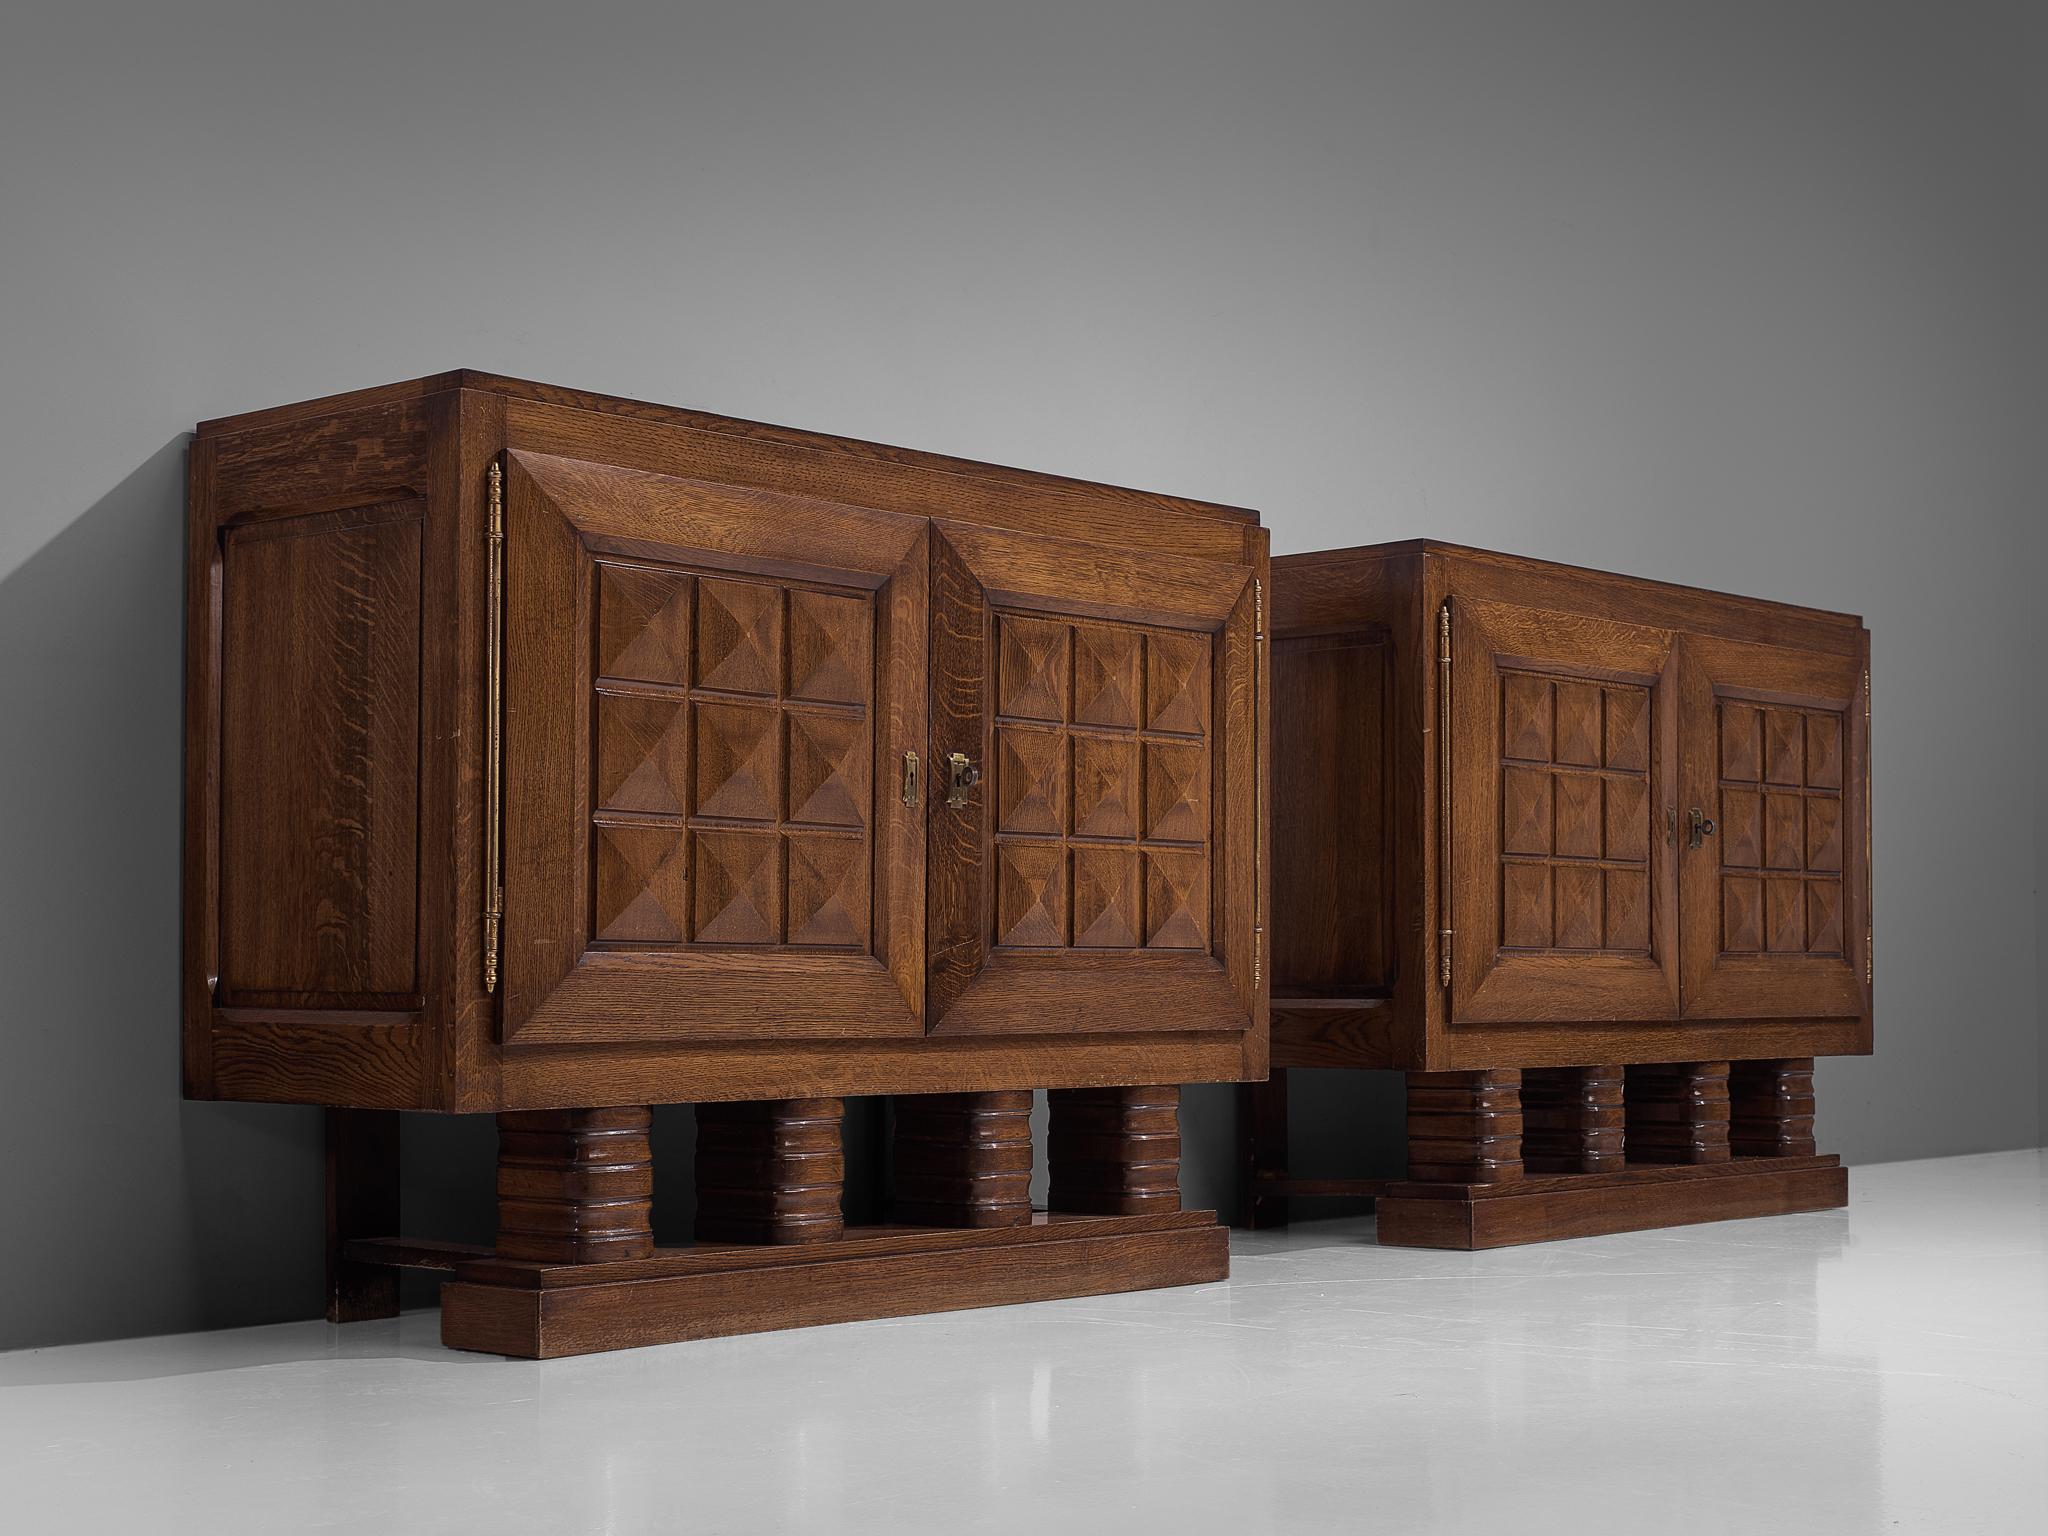 Gaston Poisson, pair of cabinets, stained oak, brass, France, 1930s

Sturdy pair of identical credenzas in oak with graphical doorpanels. These sideboards are equipped with several shelves which provide plenty of storage space. The doorpanels and